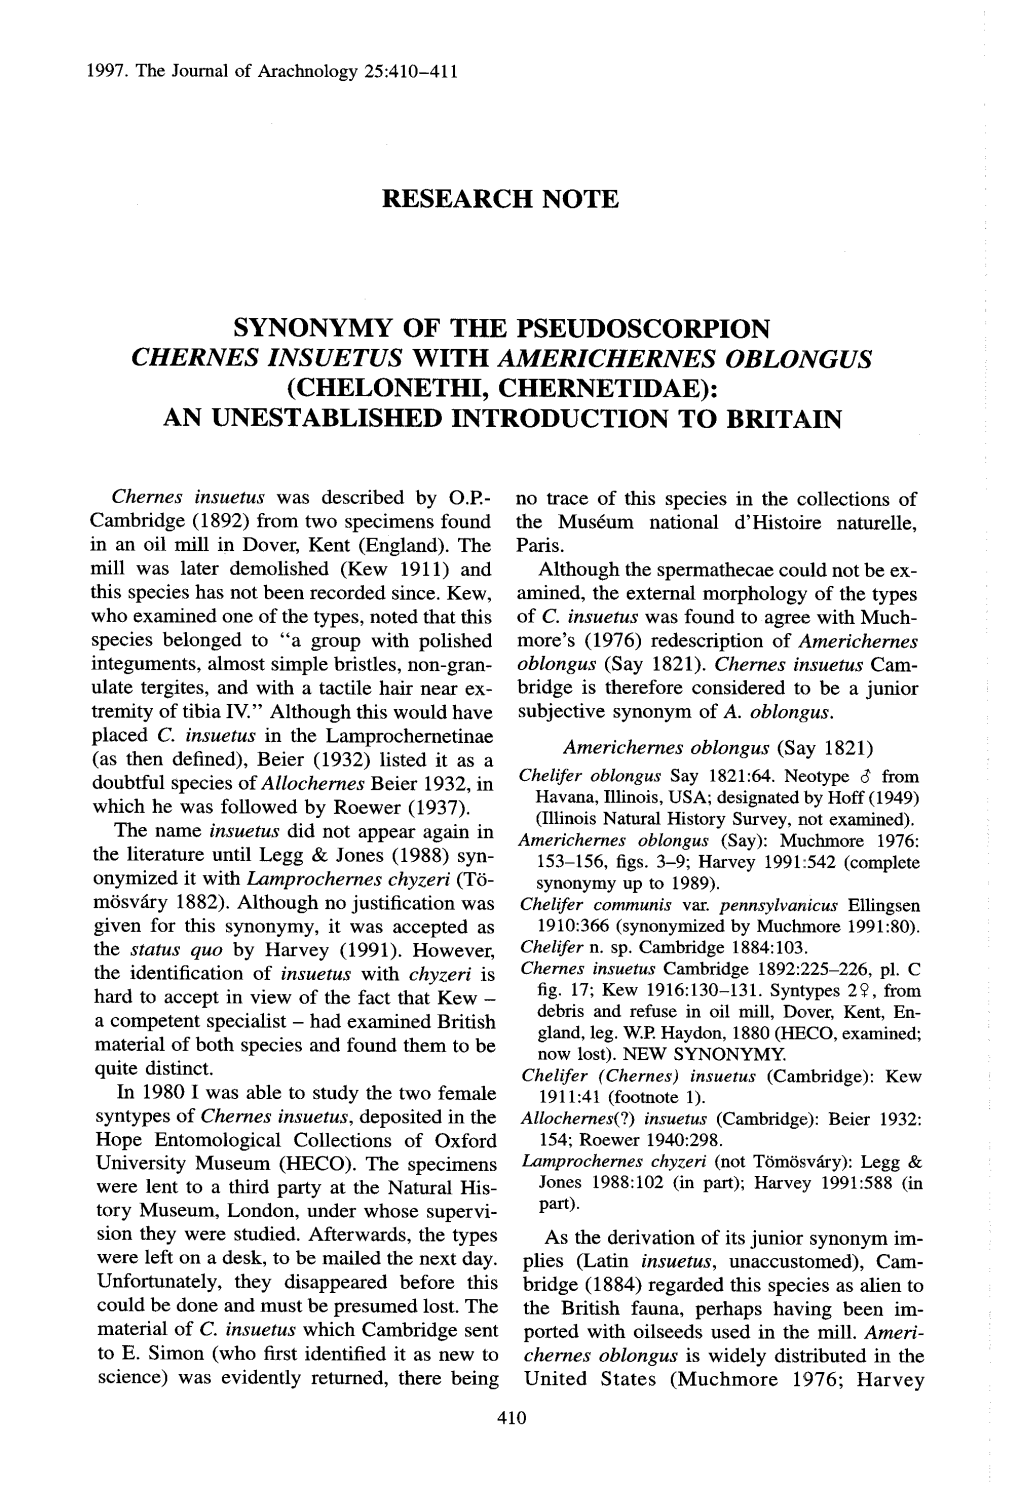 Chelonethi, Chernetidae) : an Unestablished Introduction to Britai N